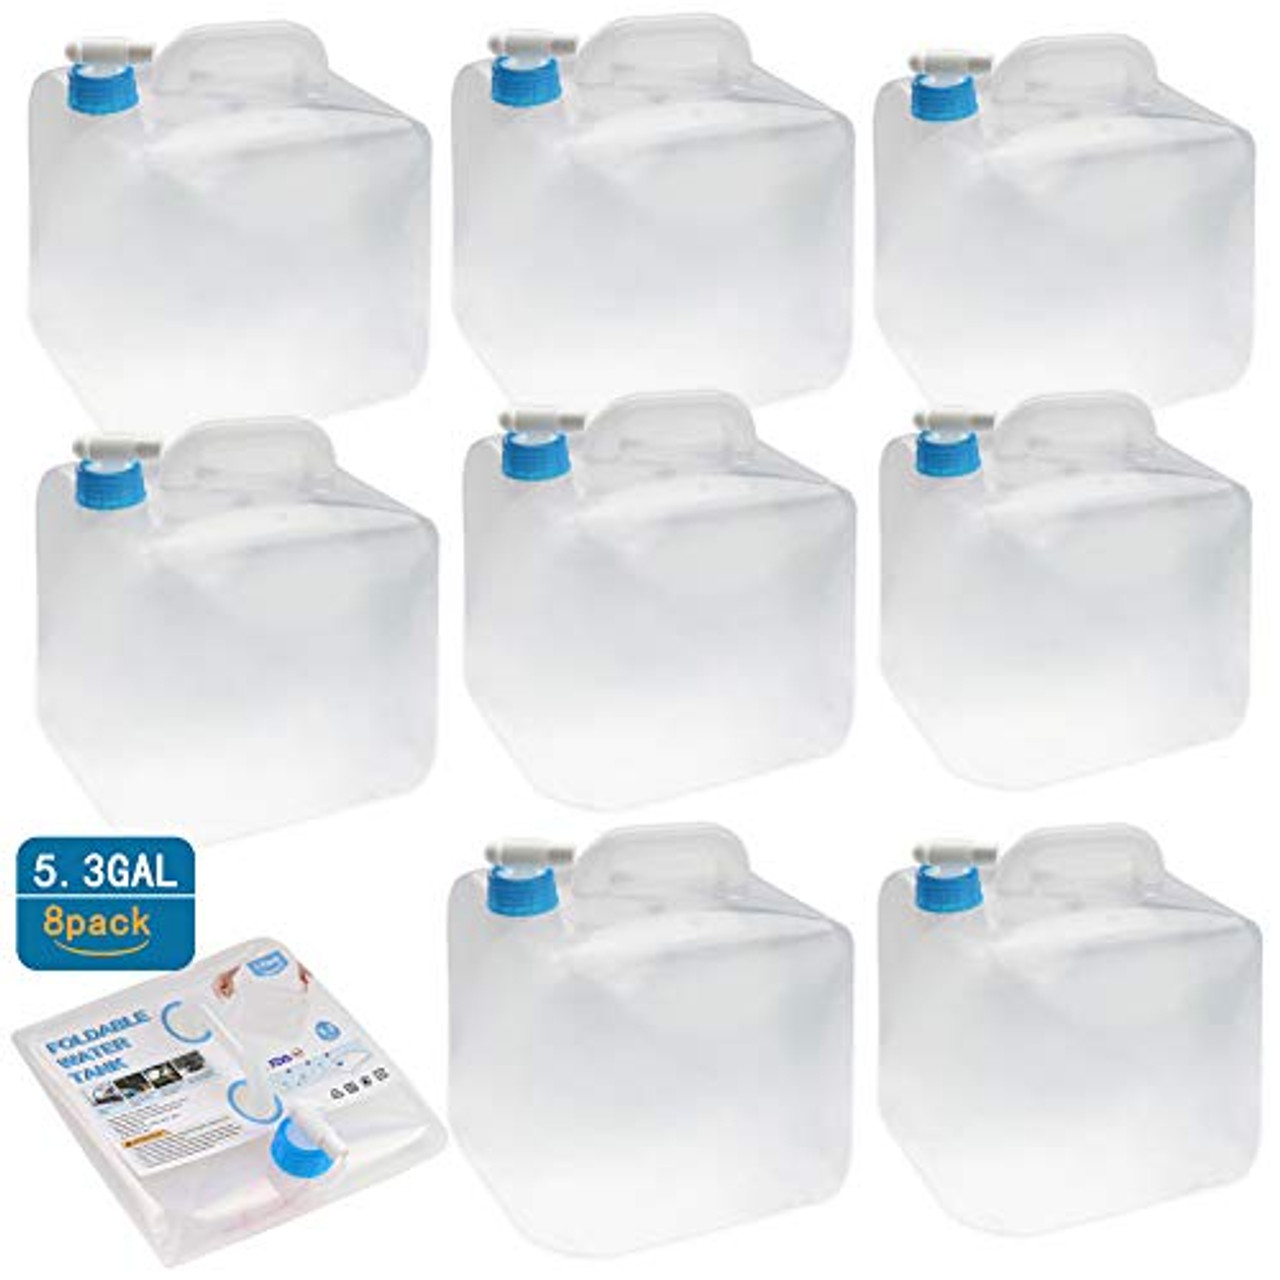 Collapsible Water Storage Container - 5 Gallon Camping Water Container  Portable Folding Water Cube Emergency Water Storage BPA Free, 8 Pack